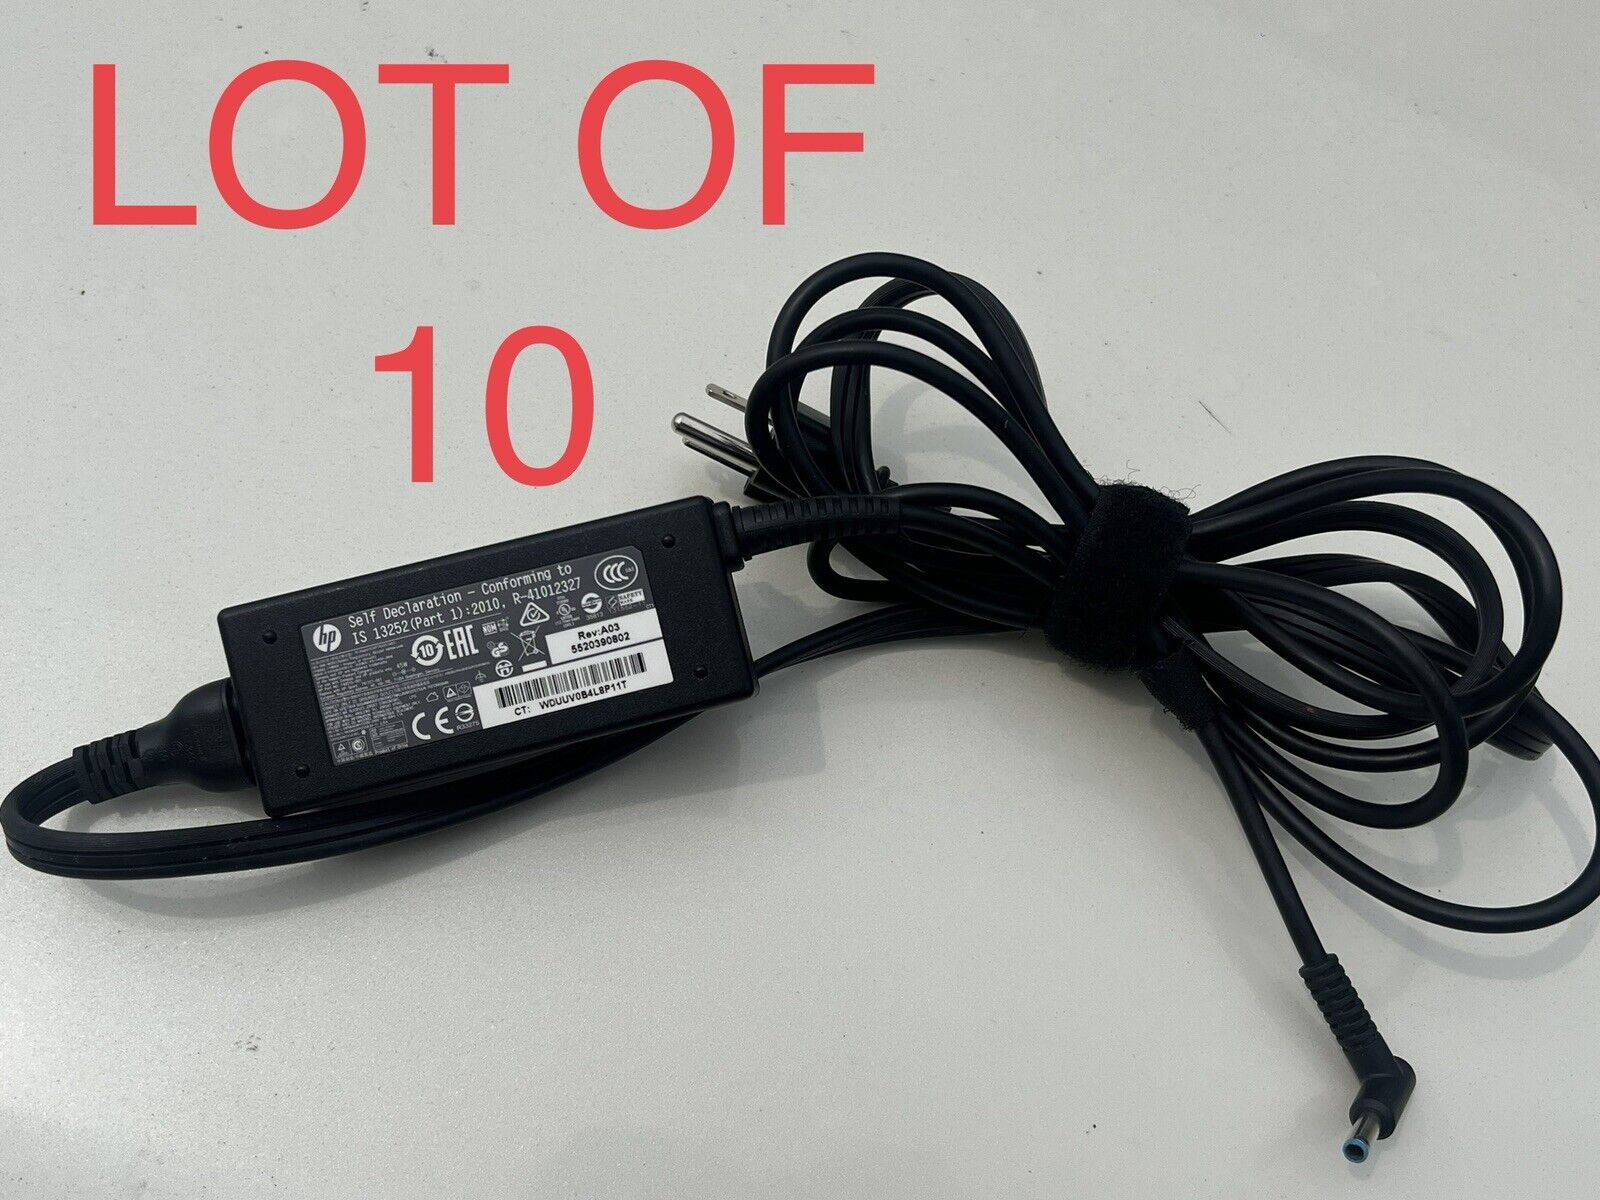 LOT OF 10 OEM HP Laptop AC Adapter Power Supply Charger 741727-001 45W Blue Tip